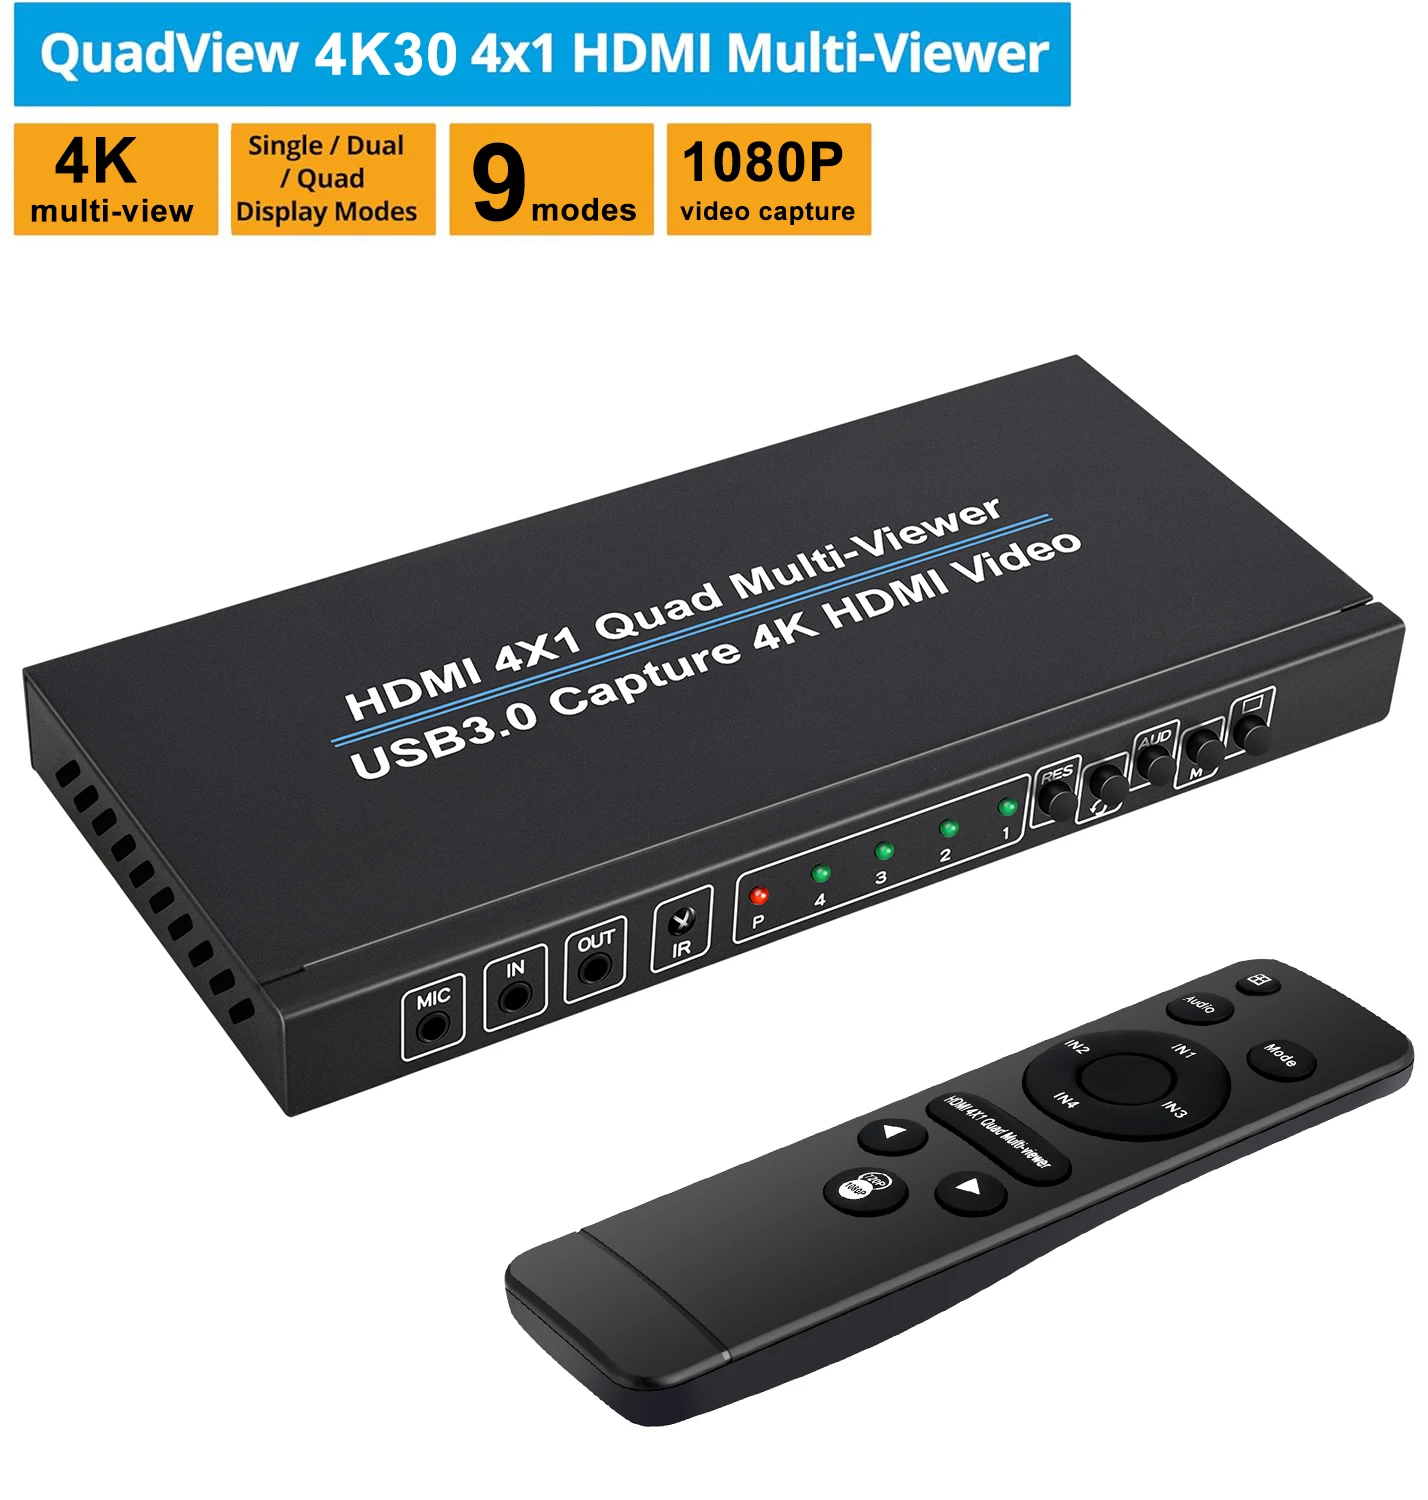 

4K 4x1 HDMI Multi Viewer QuadView with IR Remote – 4 in 1 Out 9 Display Modes with 1080p@60Hz USB3.0 Video Capture Card Function